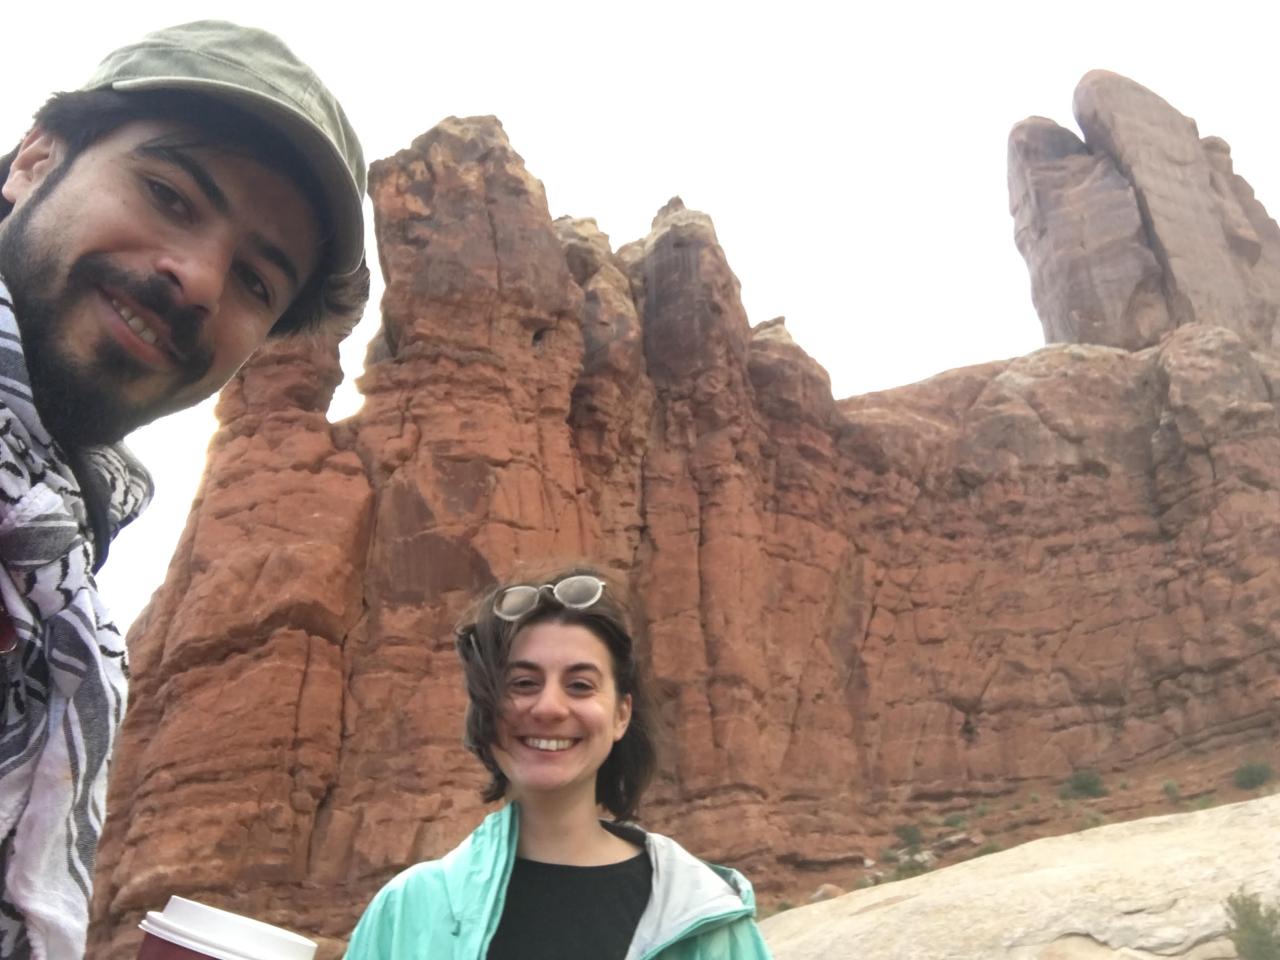 New Day Film directors Jillian Karole and Ahmed Mansour smile at the camera on a windy day. They stand outside with a rocky, sandy cliff towering behind them.